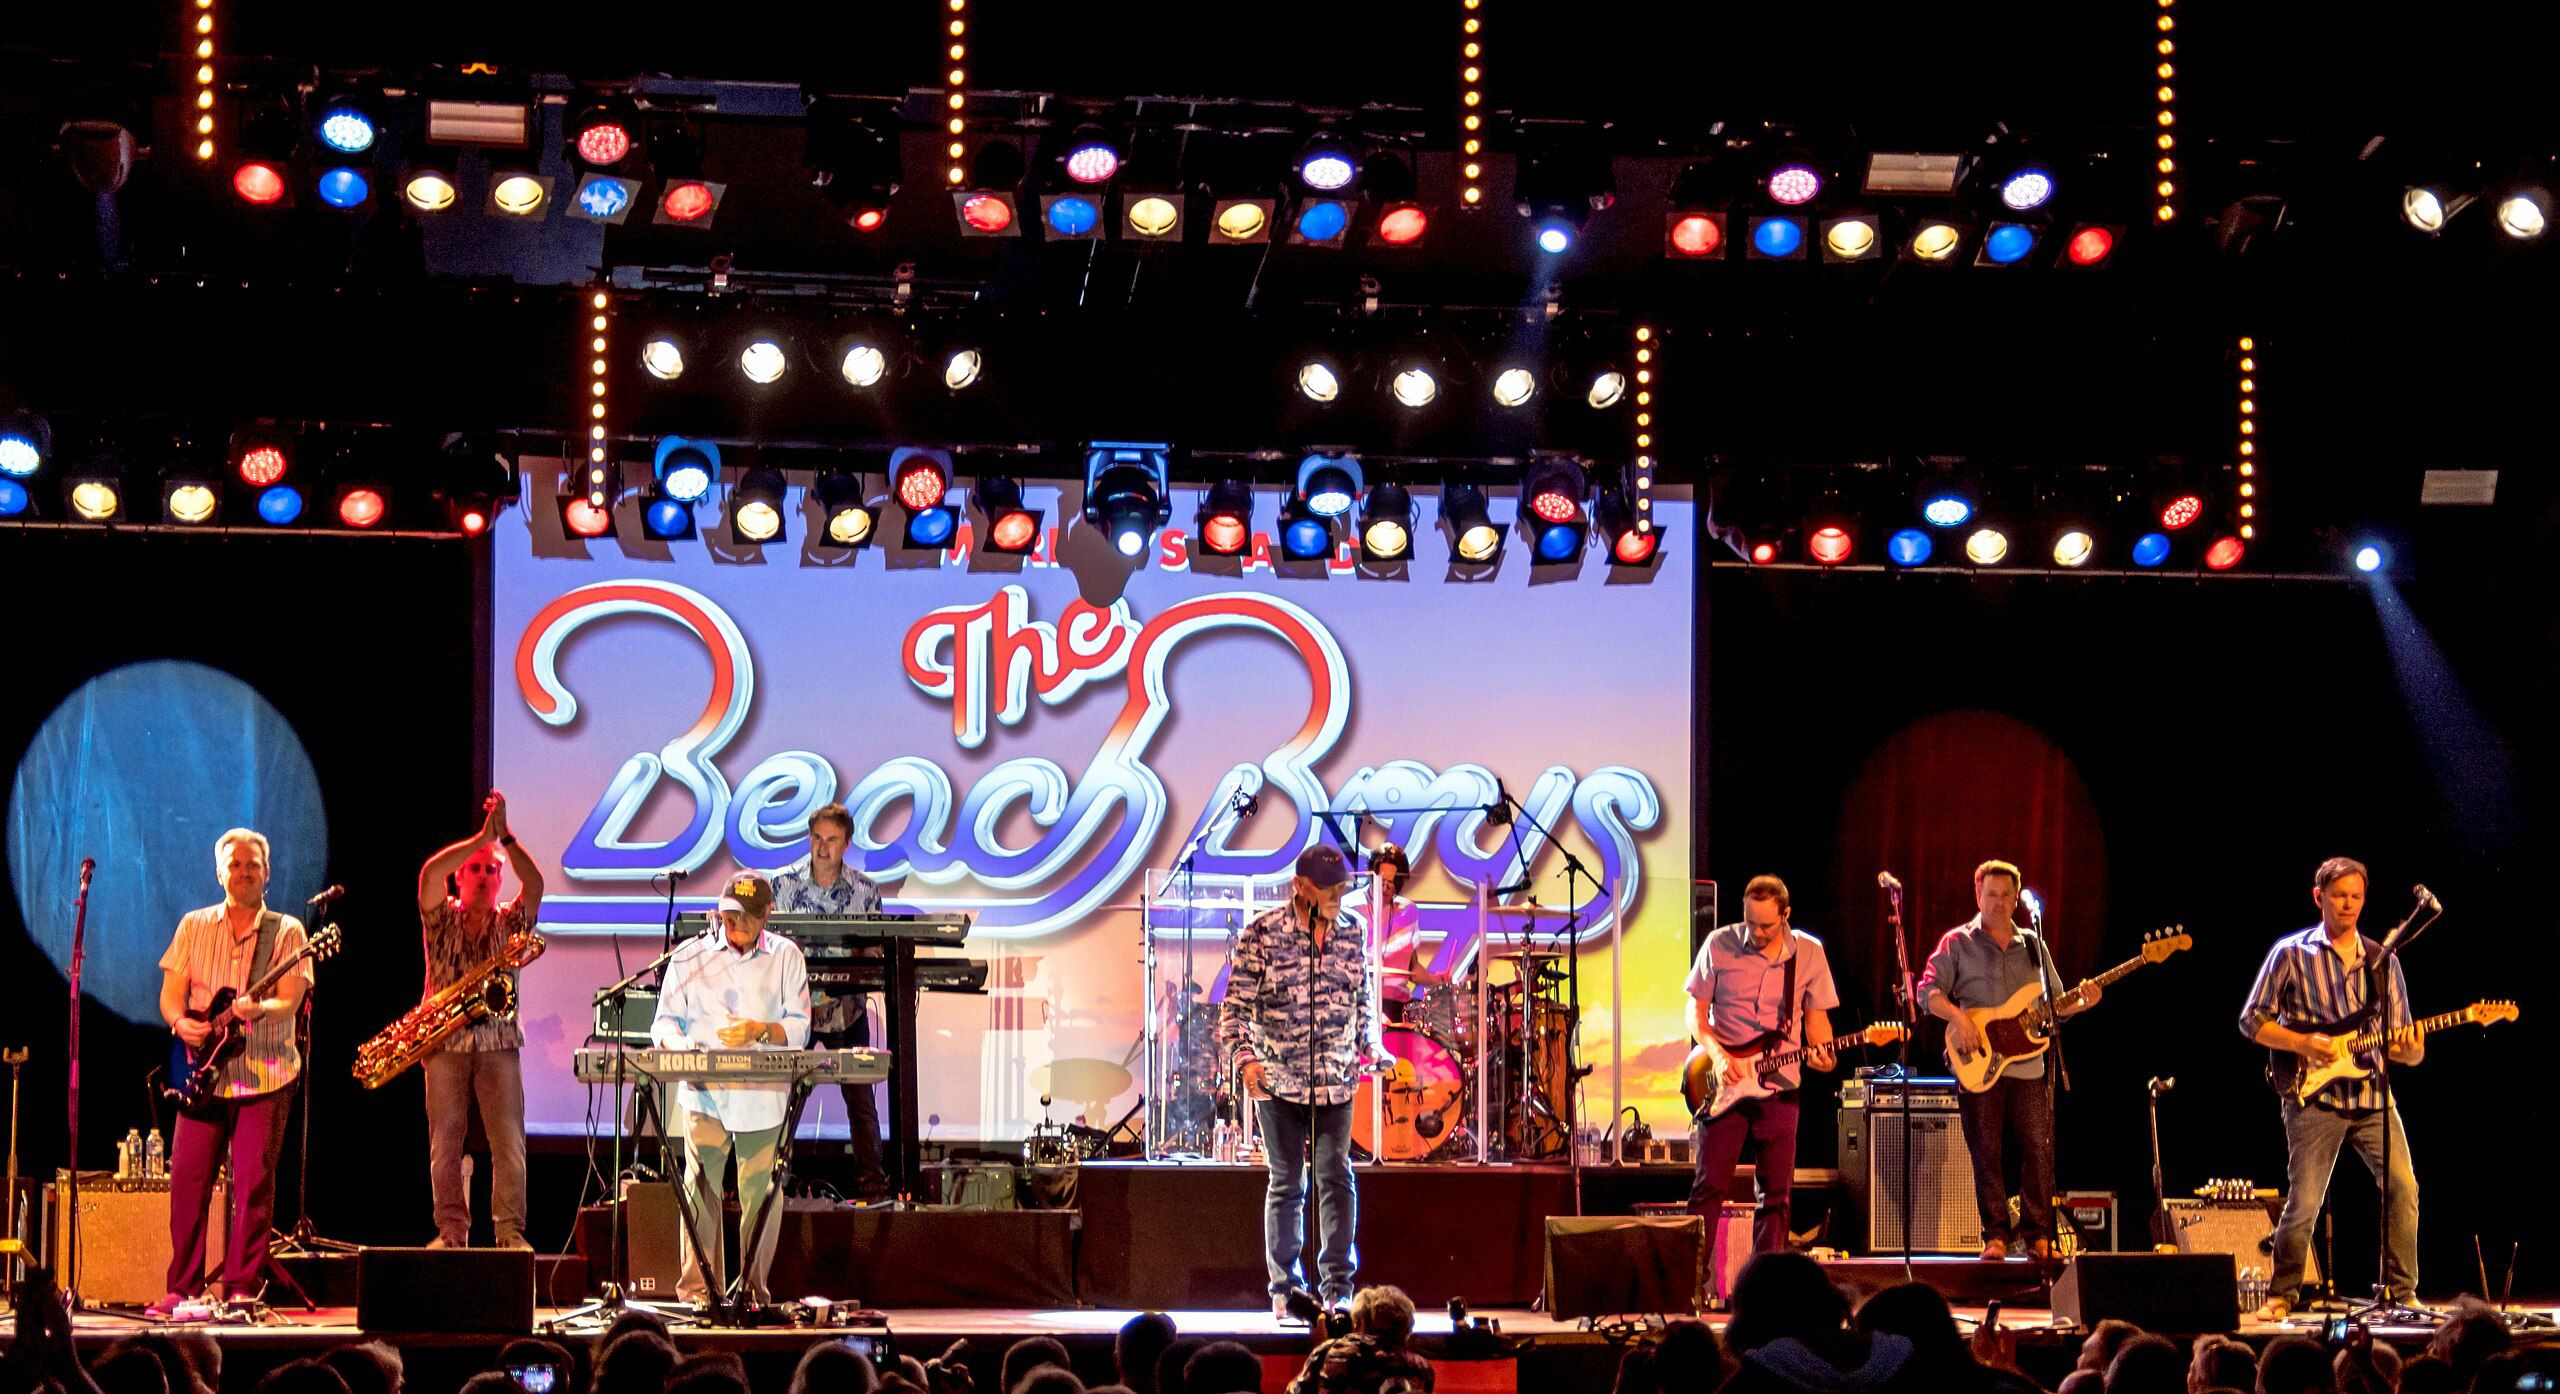 <p>The Beach Boys have been delighting live audiences since the 1960s with their signature harmonies and classic hits. Of course, closer inspection of the “Tour” page <a href="https://thebeachboys.com/pages/tour">on their official website reveals</a> that the artist you would see on the concert stage is “The Beach Boys/Mike Love,” and indeed, Mike Love is the only original member of the band that you’ll see on the concert stage this year. Oh well, get a seat all the way in the back and impair your judgment with beer so that by the time they start playing “California Girls,” you won’t care who’s onstage.</p>